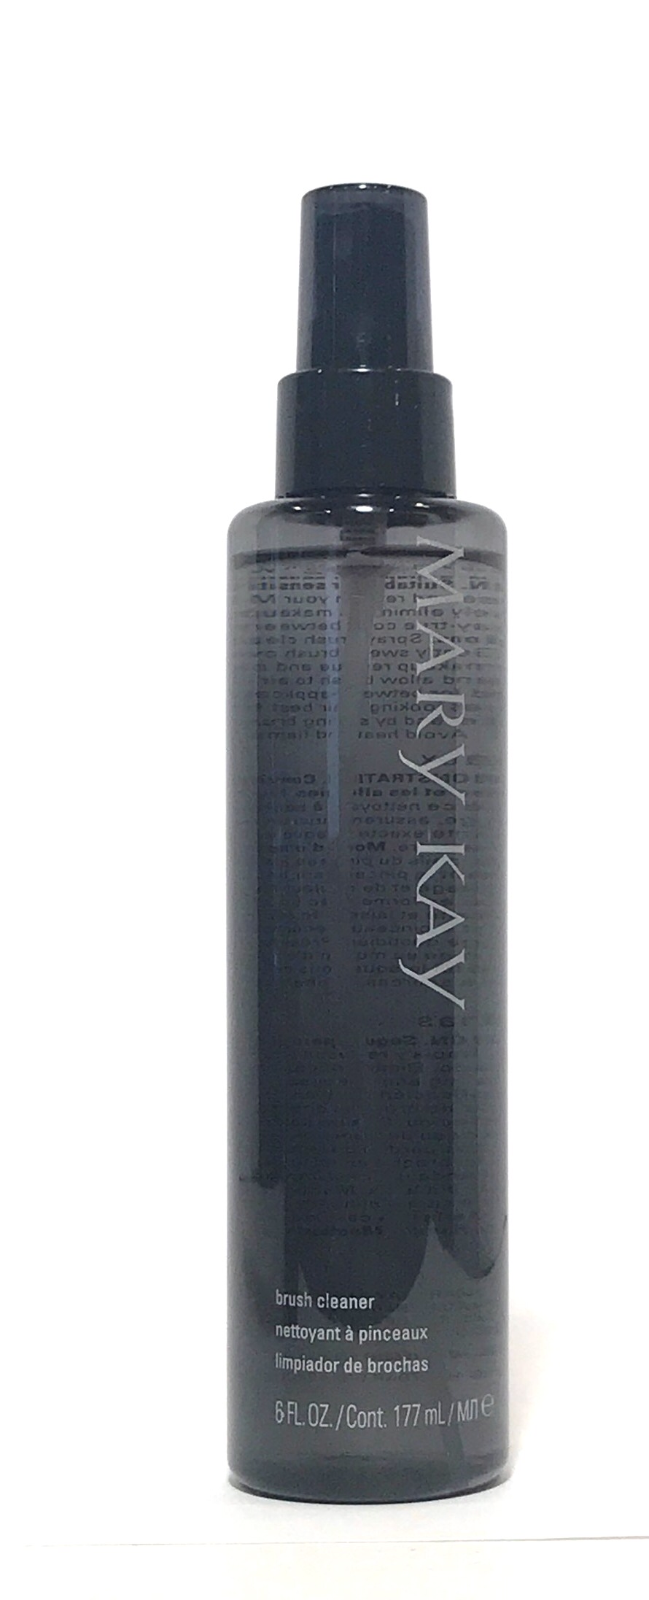 Mary Kay Exp Makeup Brush Cleaner~diminshed Shelf Life~quick Drying Spray!